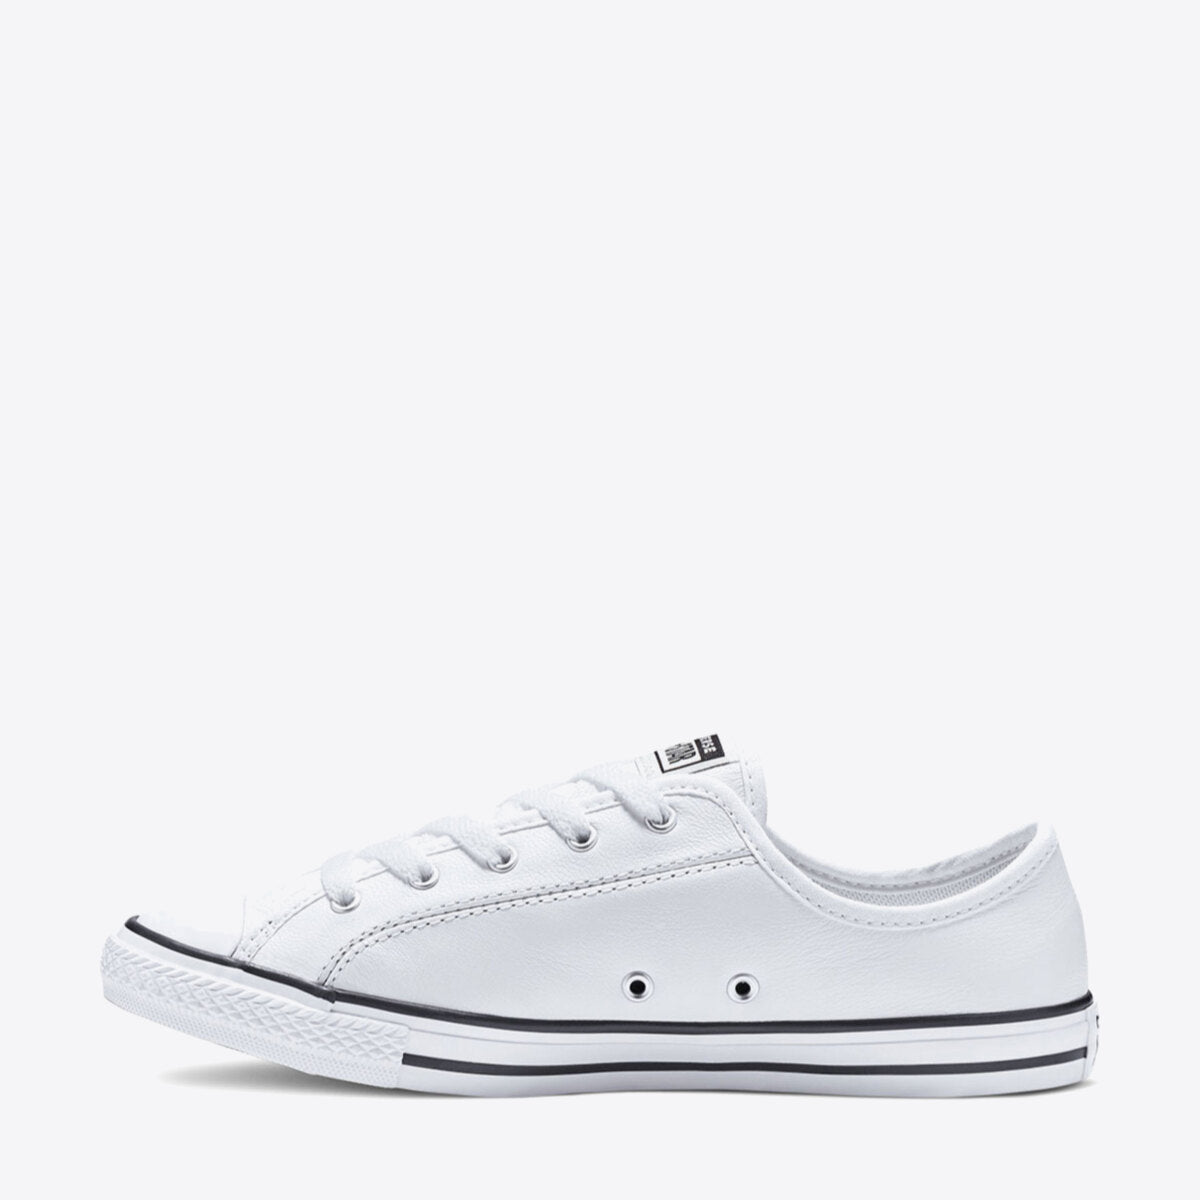 CONVERSE Dainty 2.0 Leather Low White - Image 4